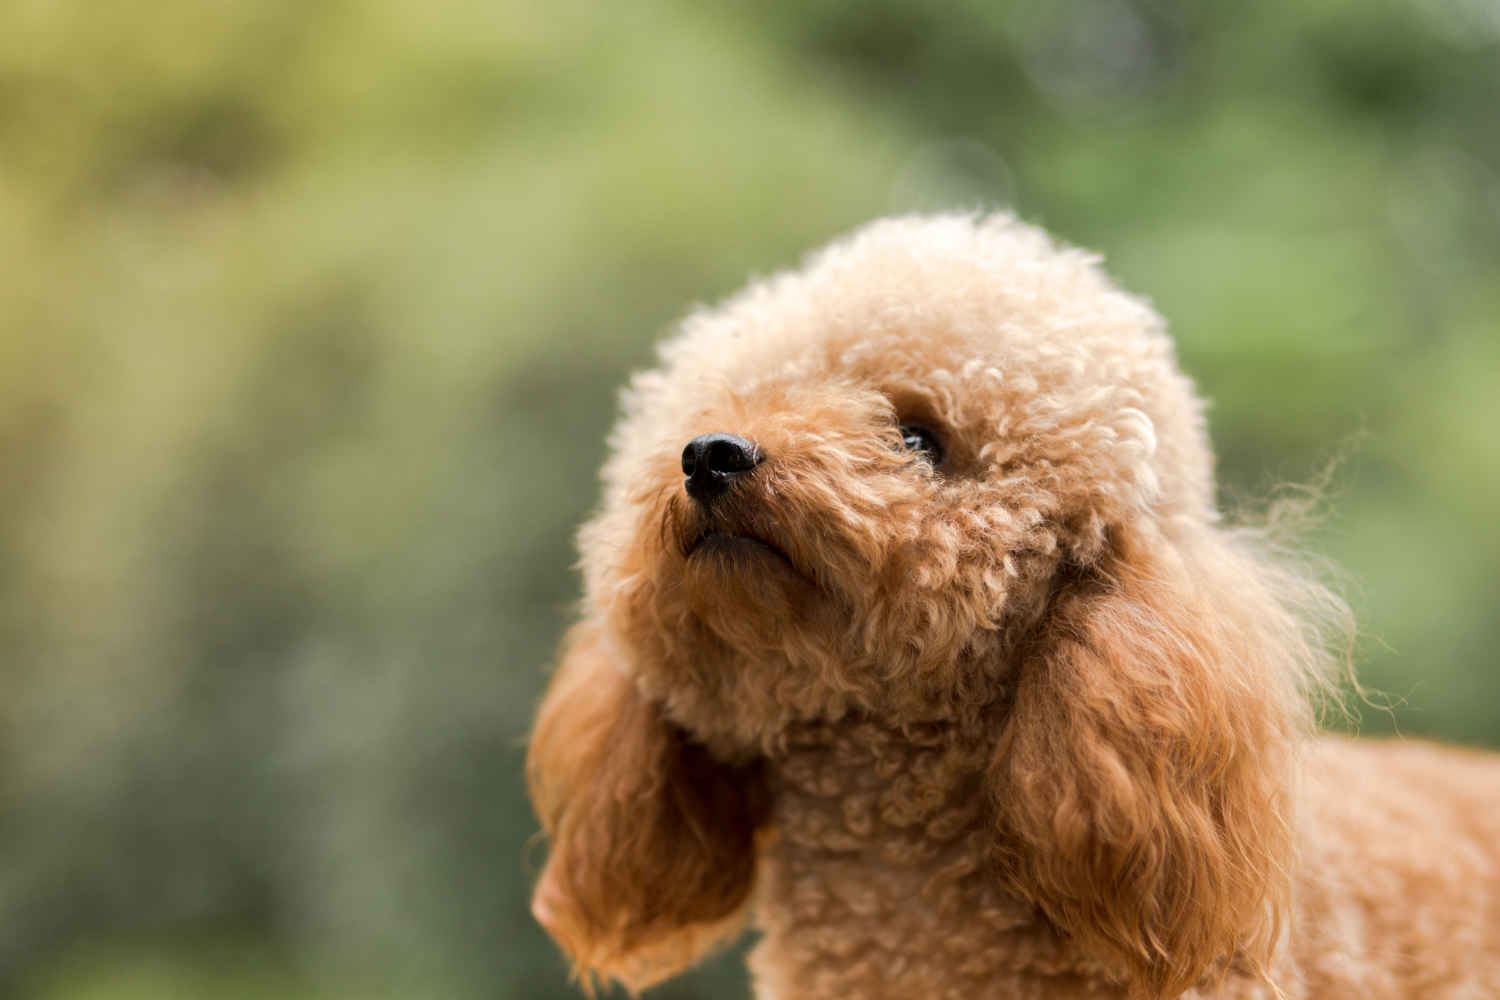 Can Poodles develop food allergies, and how can owners manage their diet to prevent and treat them?